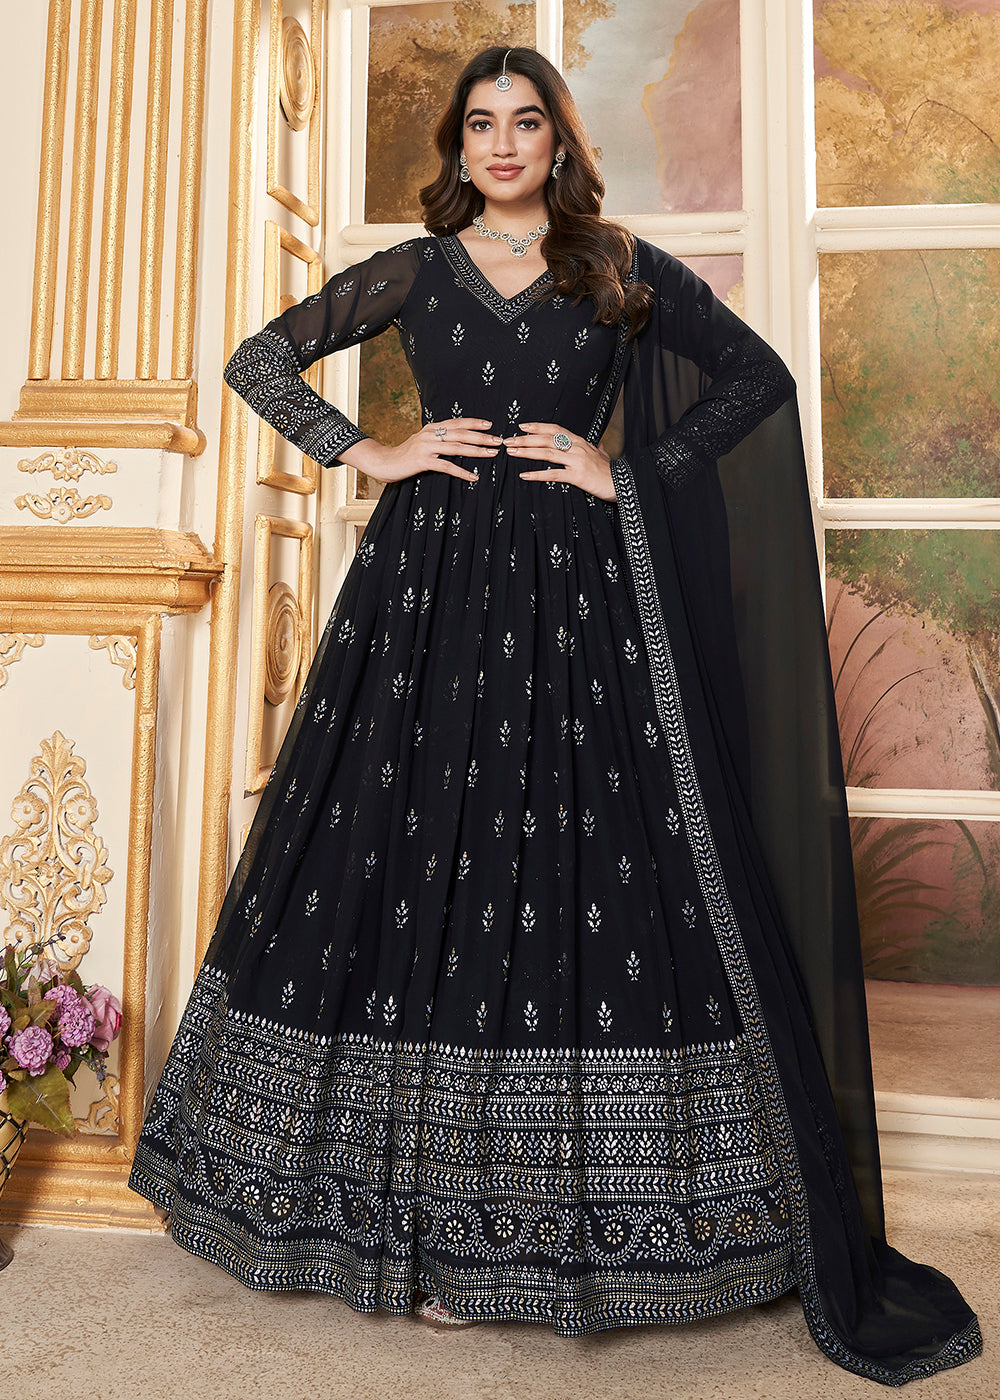 Buy Now Navy Blue Metalic Foil Work Embroidered Wedding Festive Anarkali Gown Online in USA, UK, Australia, Canada & Worldwide at Empress Clothing.